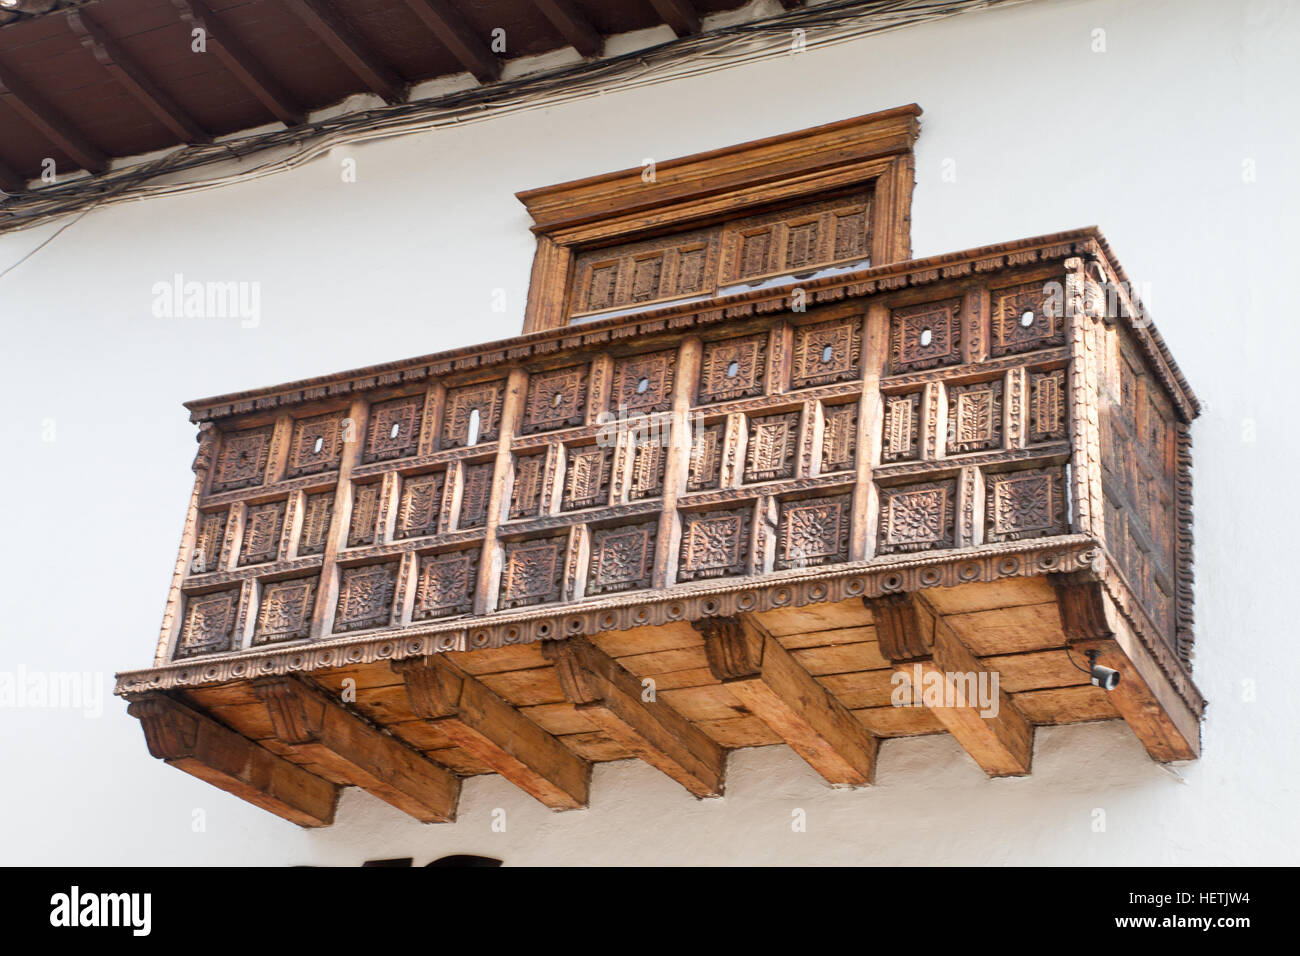 CUSCO - SEPTEMBER 02: Wooden sculptural wooden balcony architectural detail on building on the streets of Cusco, Peru on September 2nd, 2016. Stock Photo